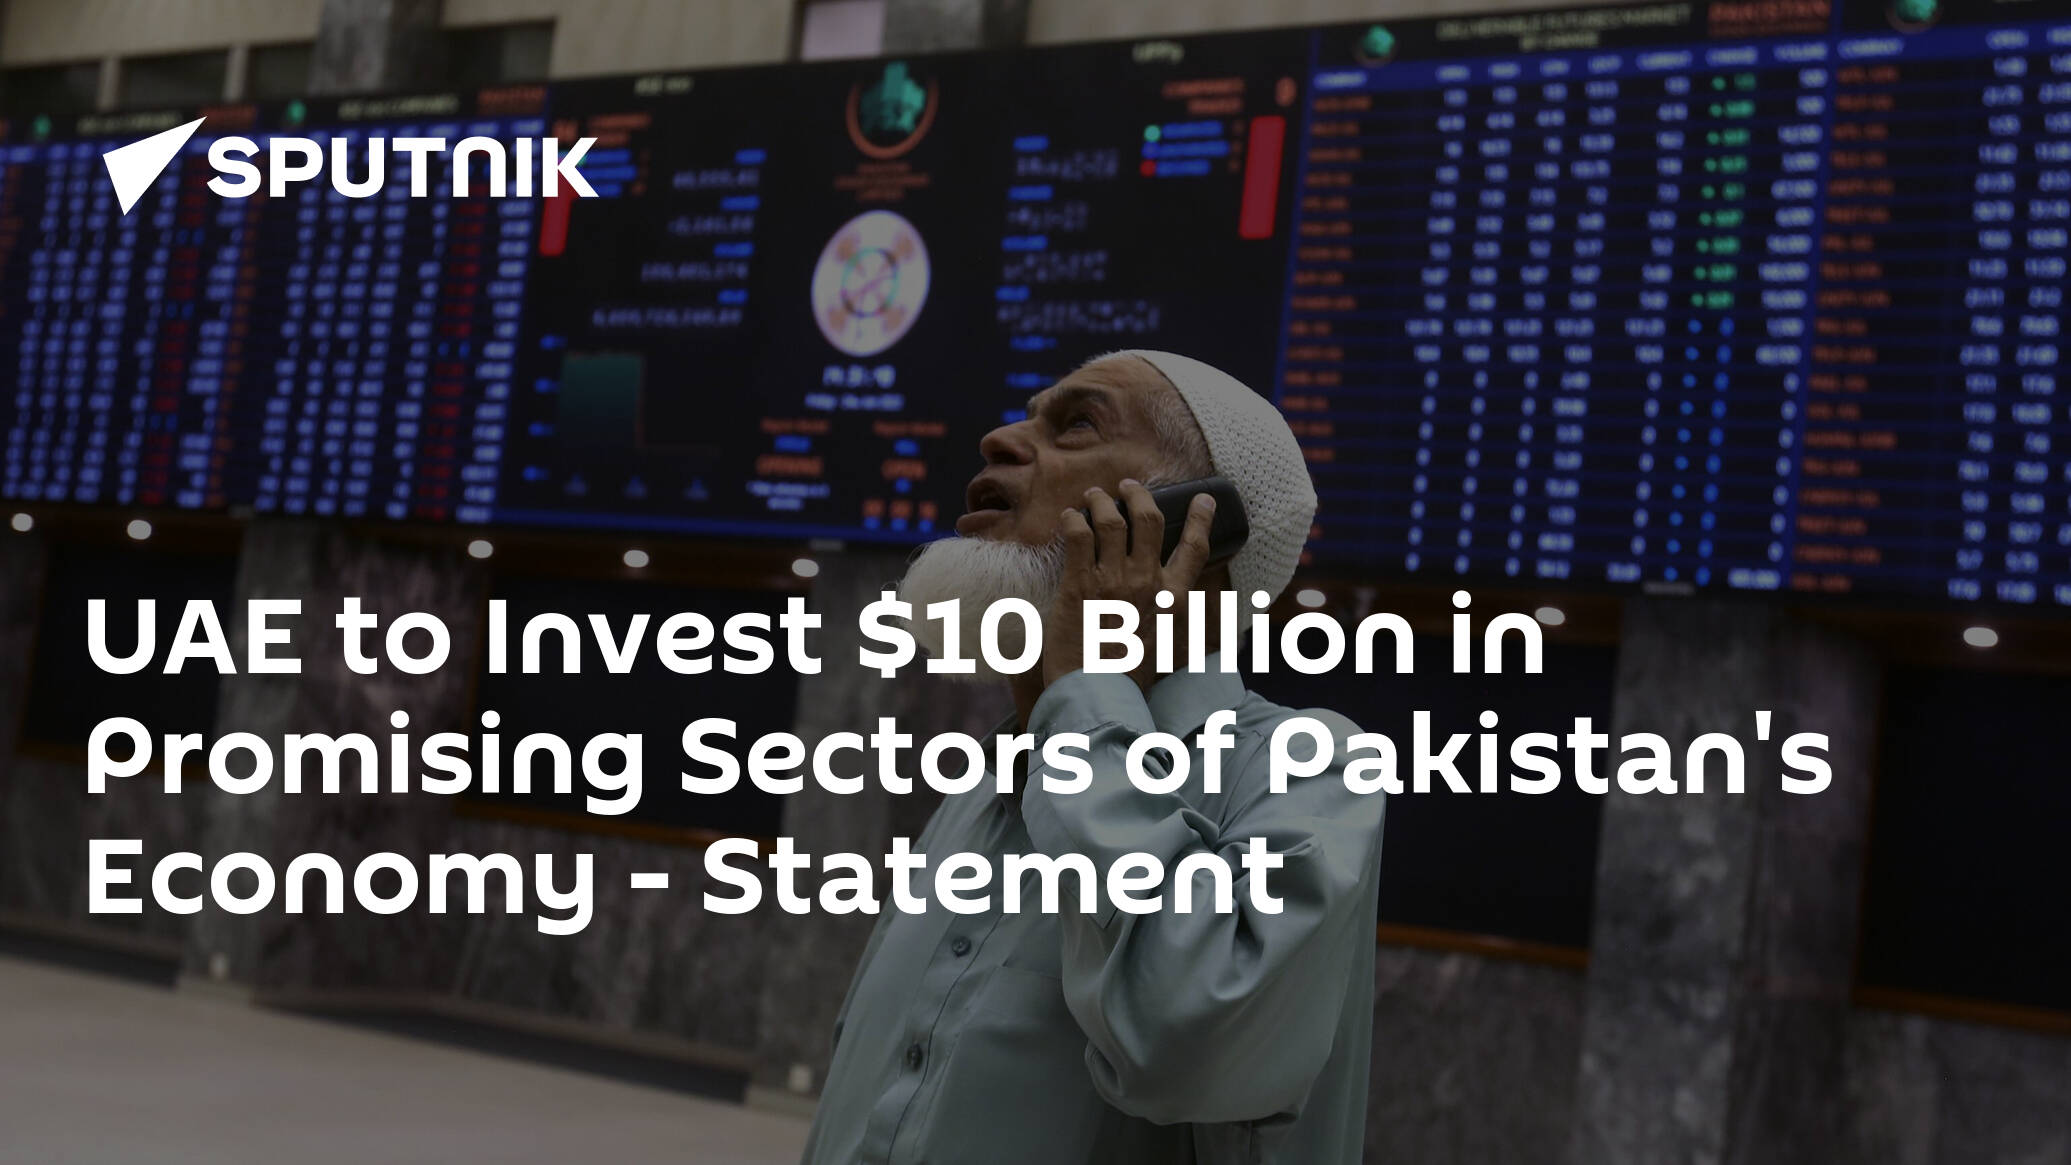 UAE to Invest 10 Billion in Promising Sectors of Pakistan's